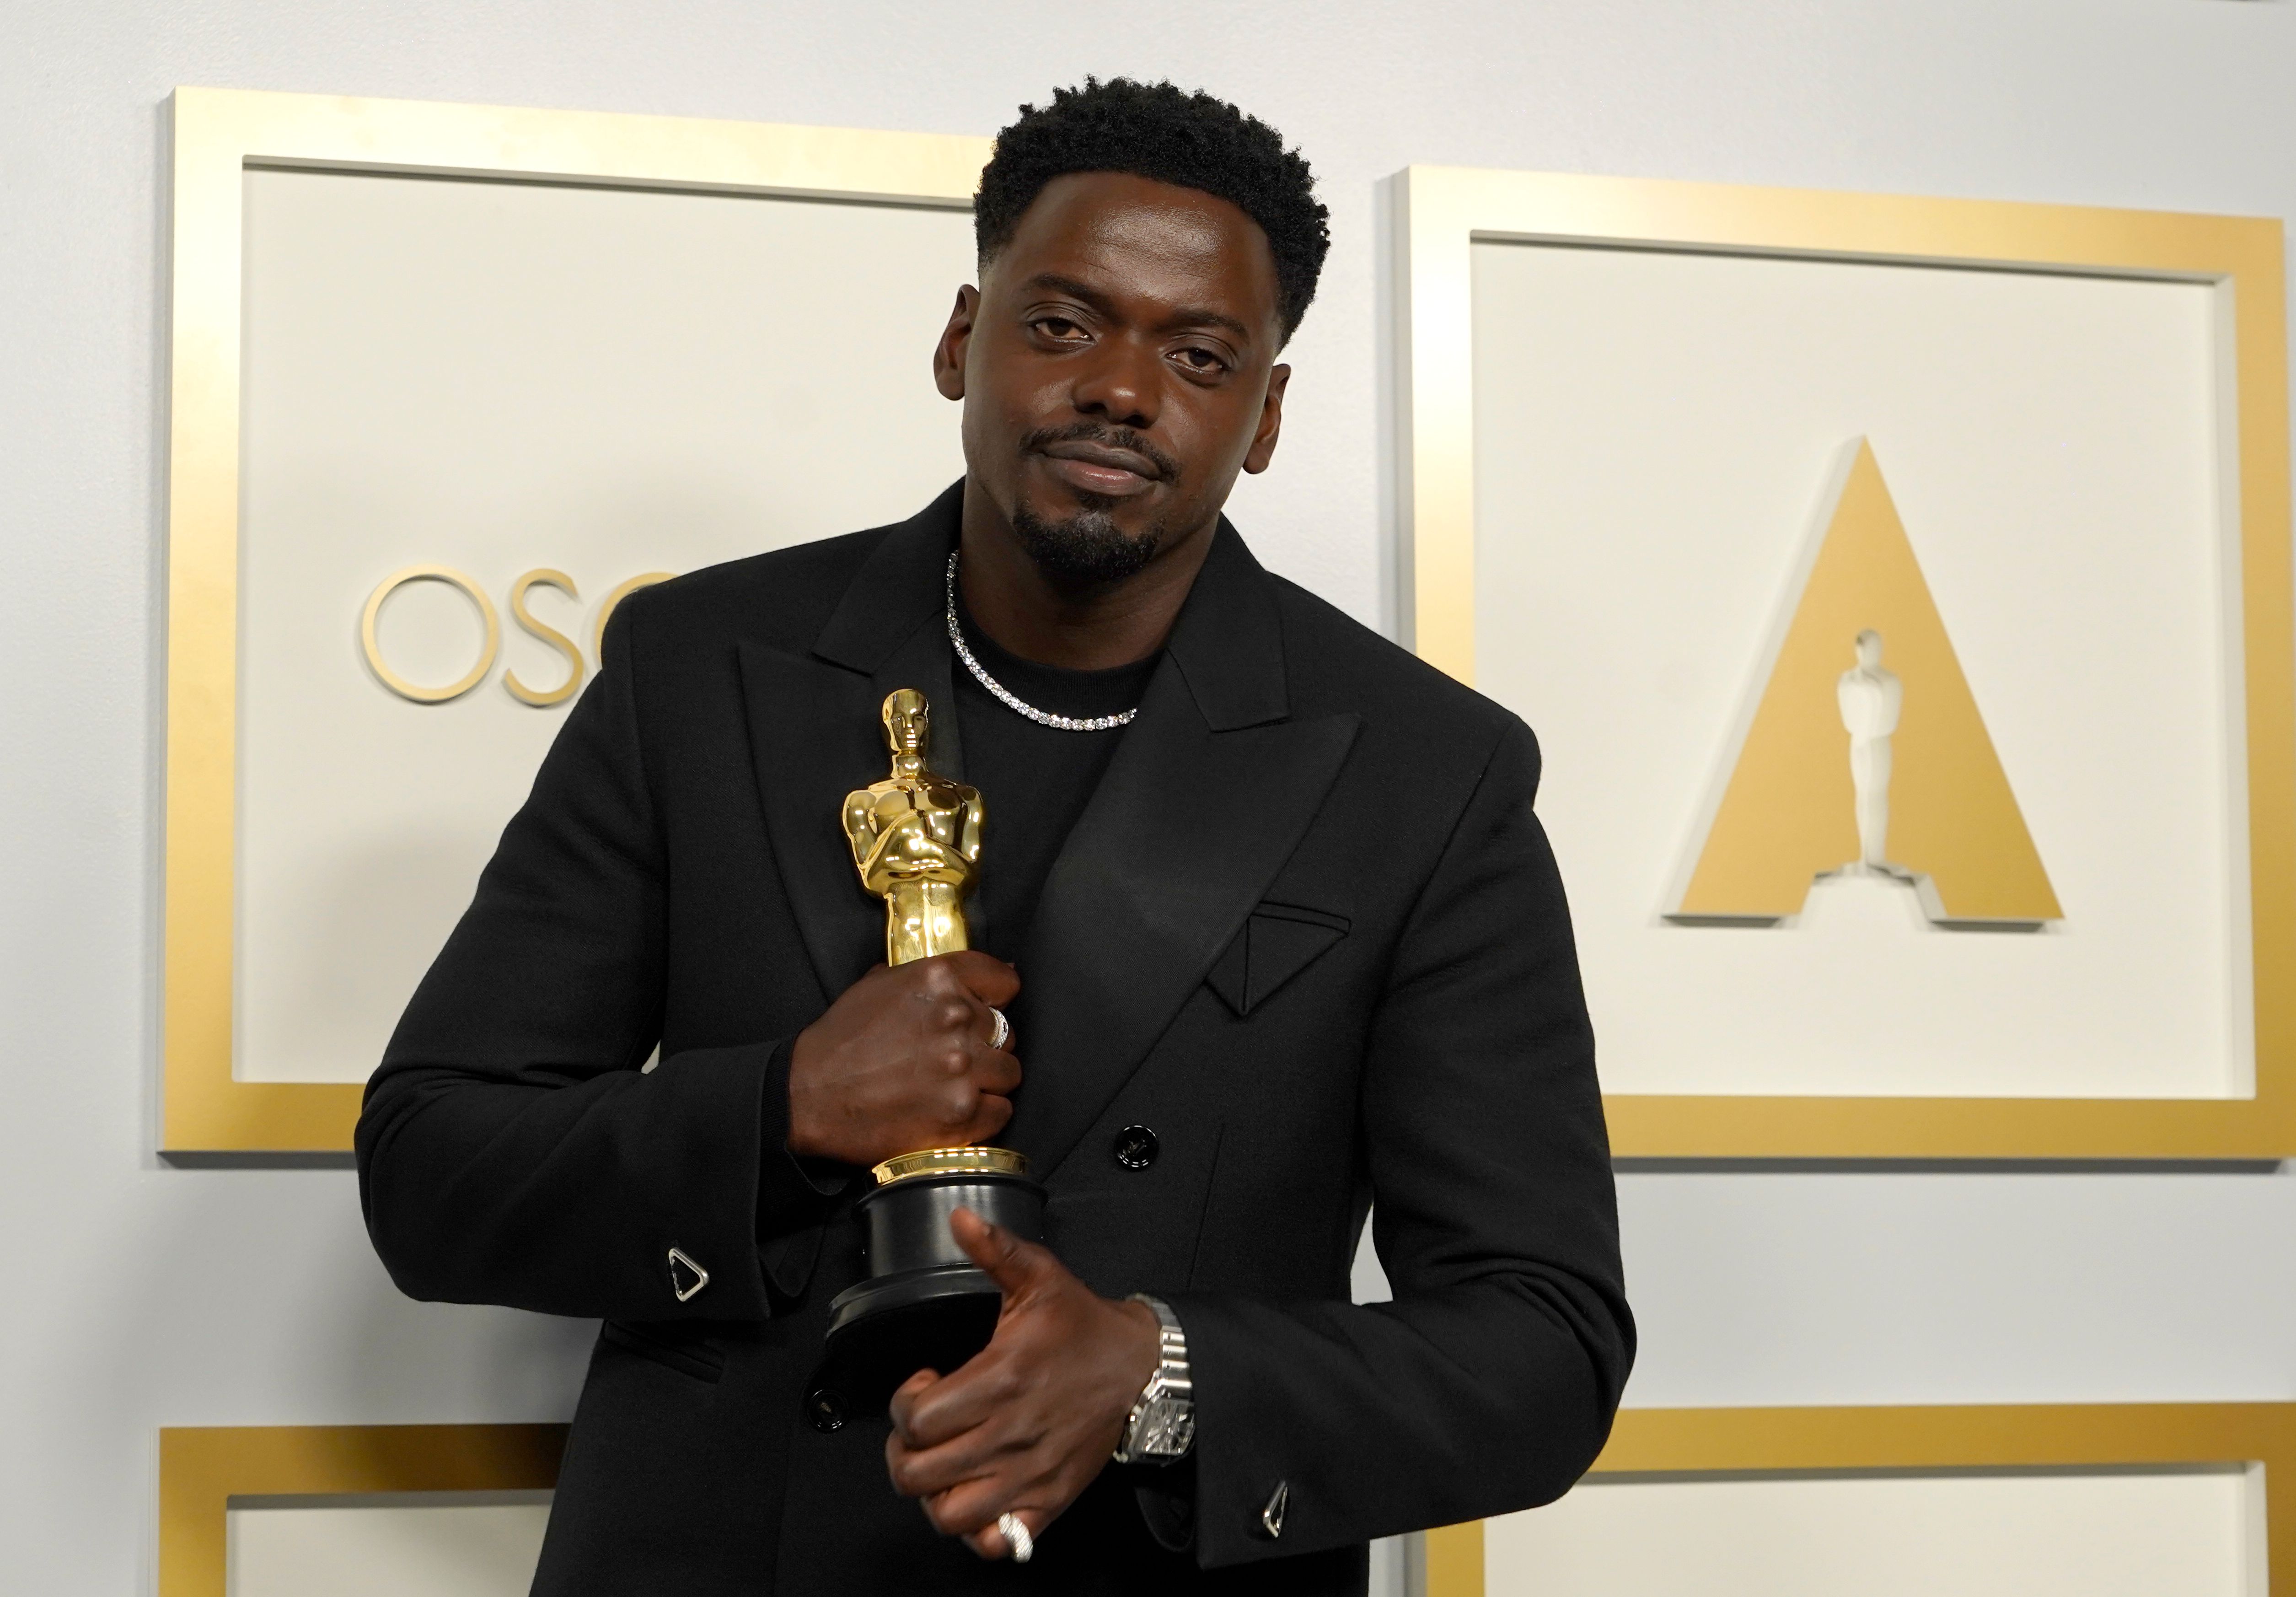 Oscars 2021 recap: Winners, speeches and top moments - ABC News